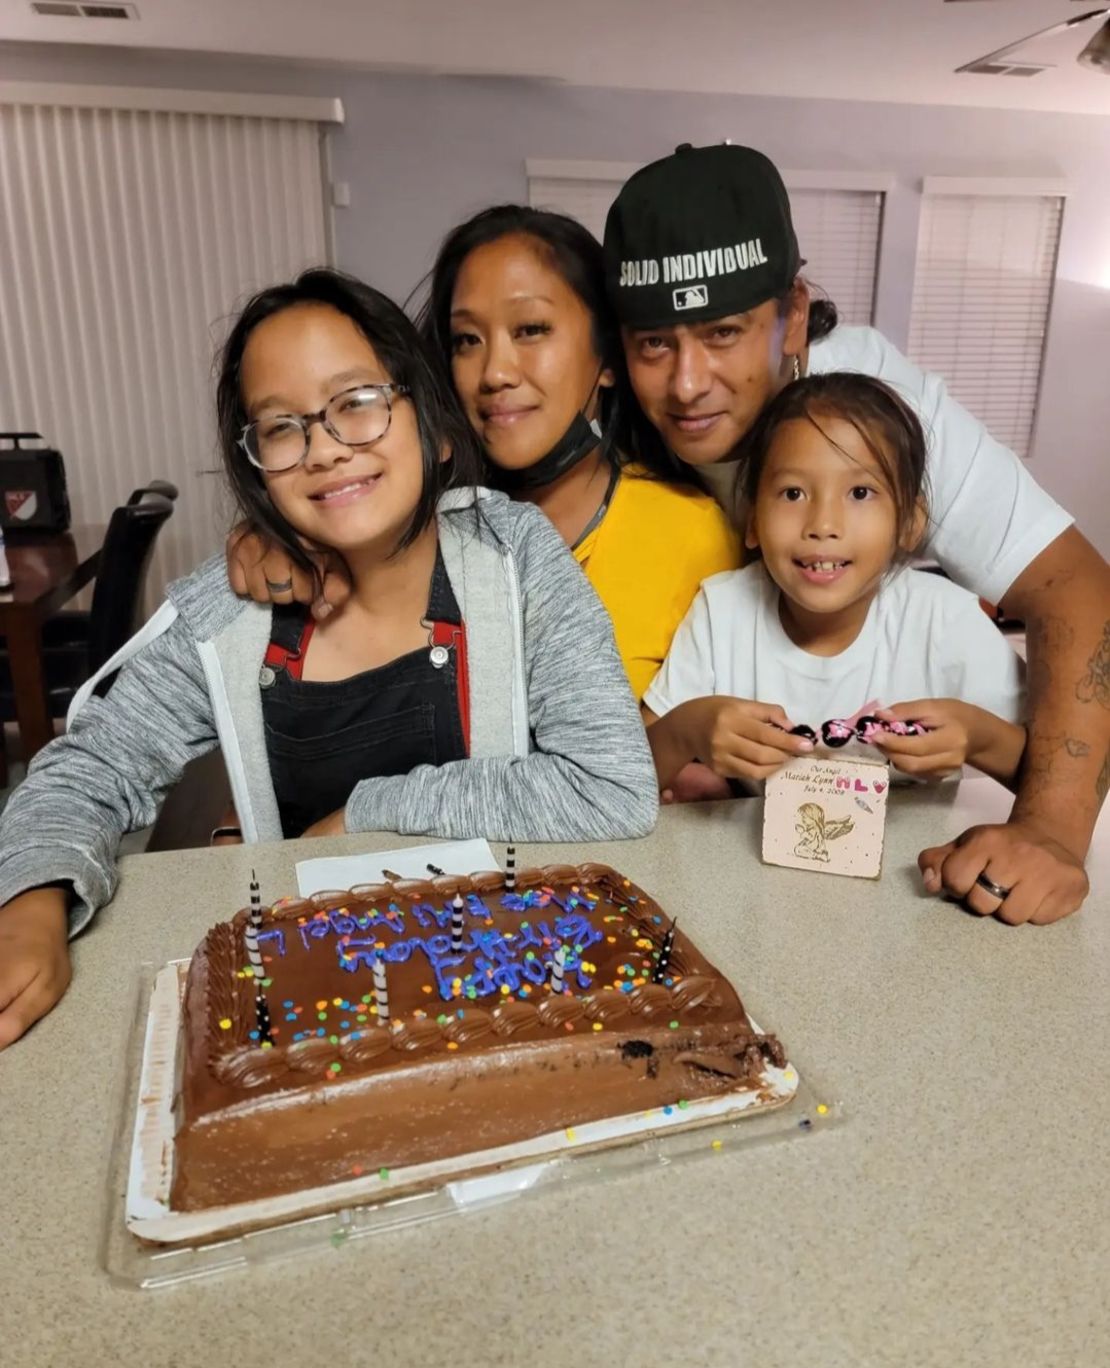 Tomas Vargas Jr., pictured here with his family, says that participating in Stockton’s guaranteed income program helped him become a better father to his children.